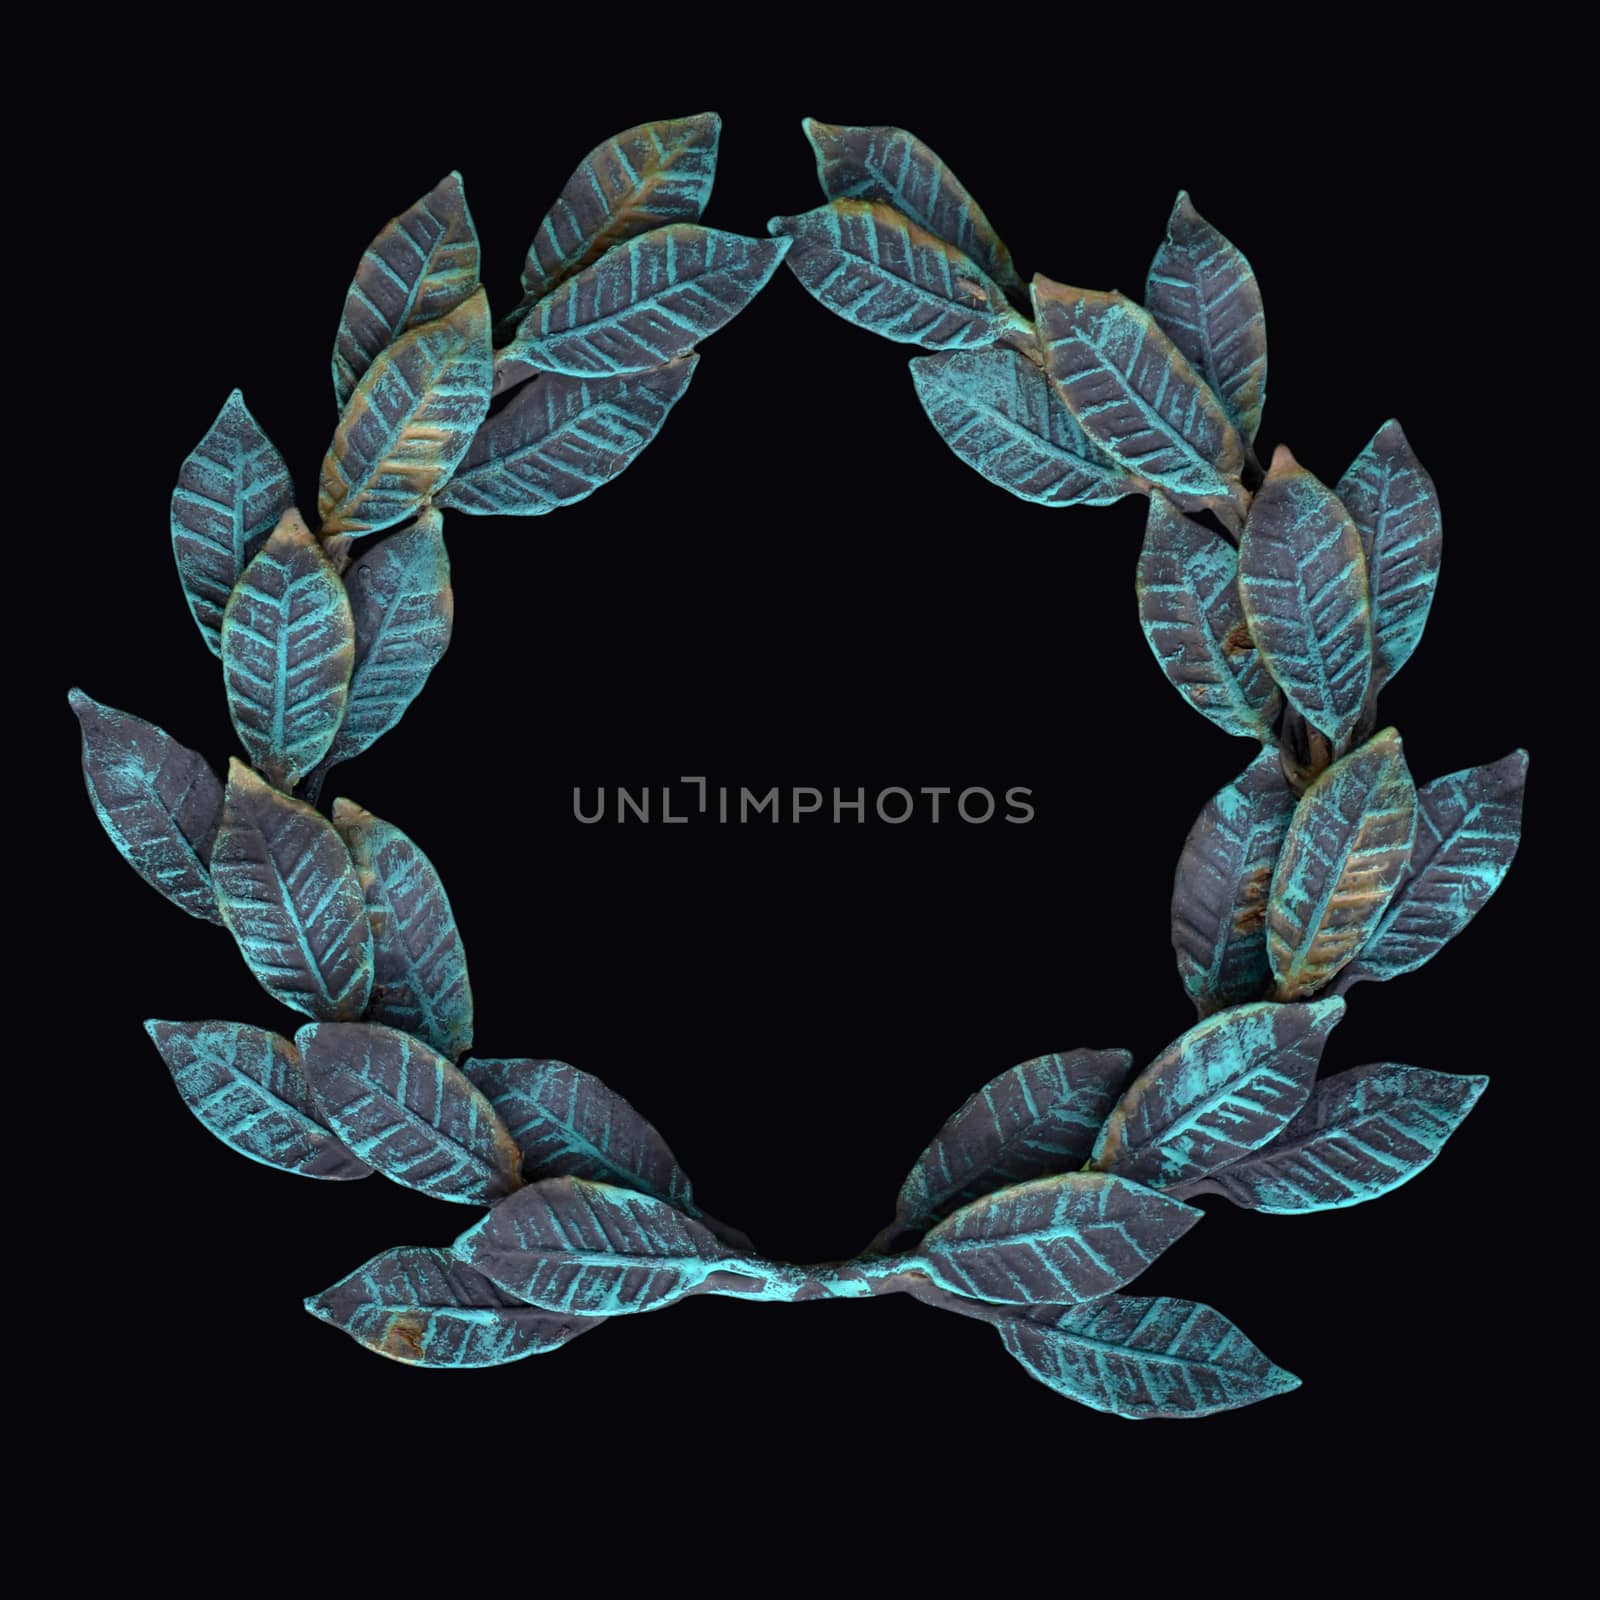 The isolate metal wreath of forged leaves with patina and rust on a black background